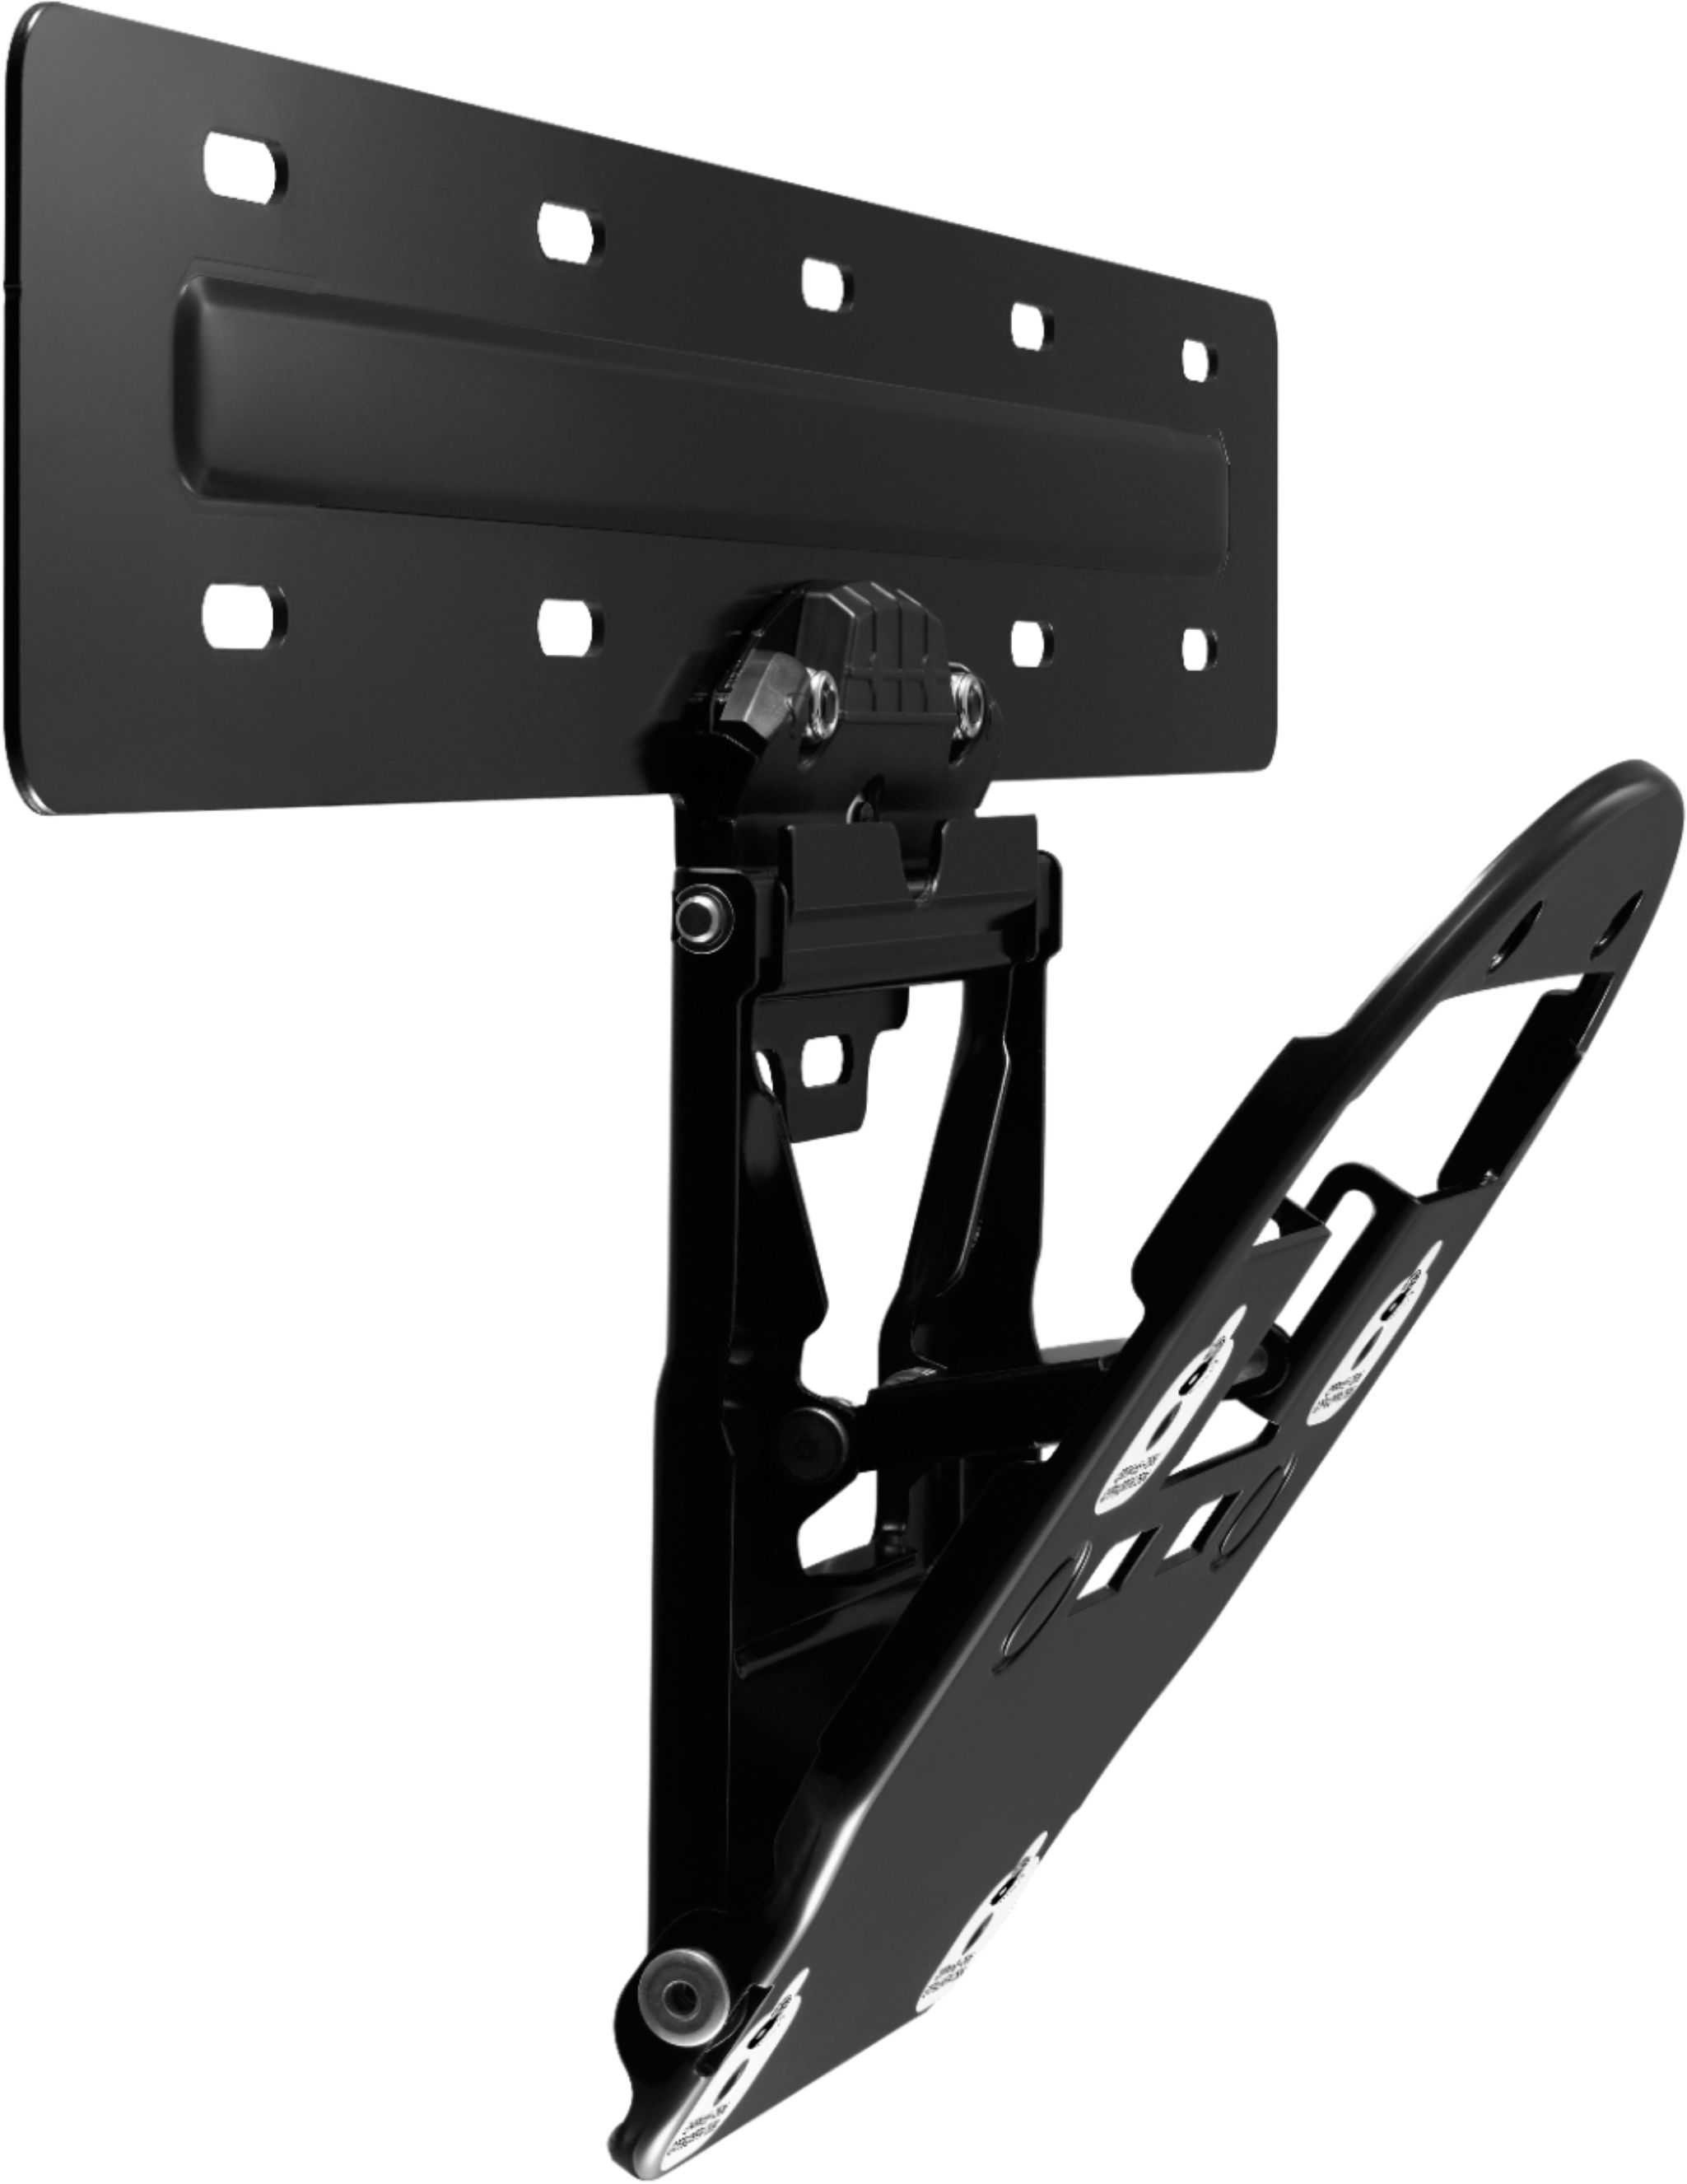 Angle View: Dynex™ - Tilting TV Wall Mount for Most 19" - 50" TVs - Black